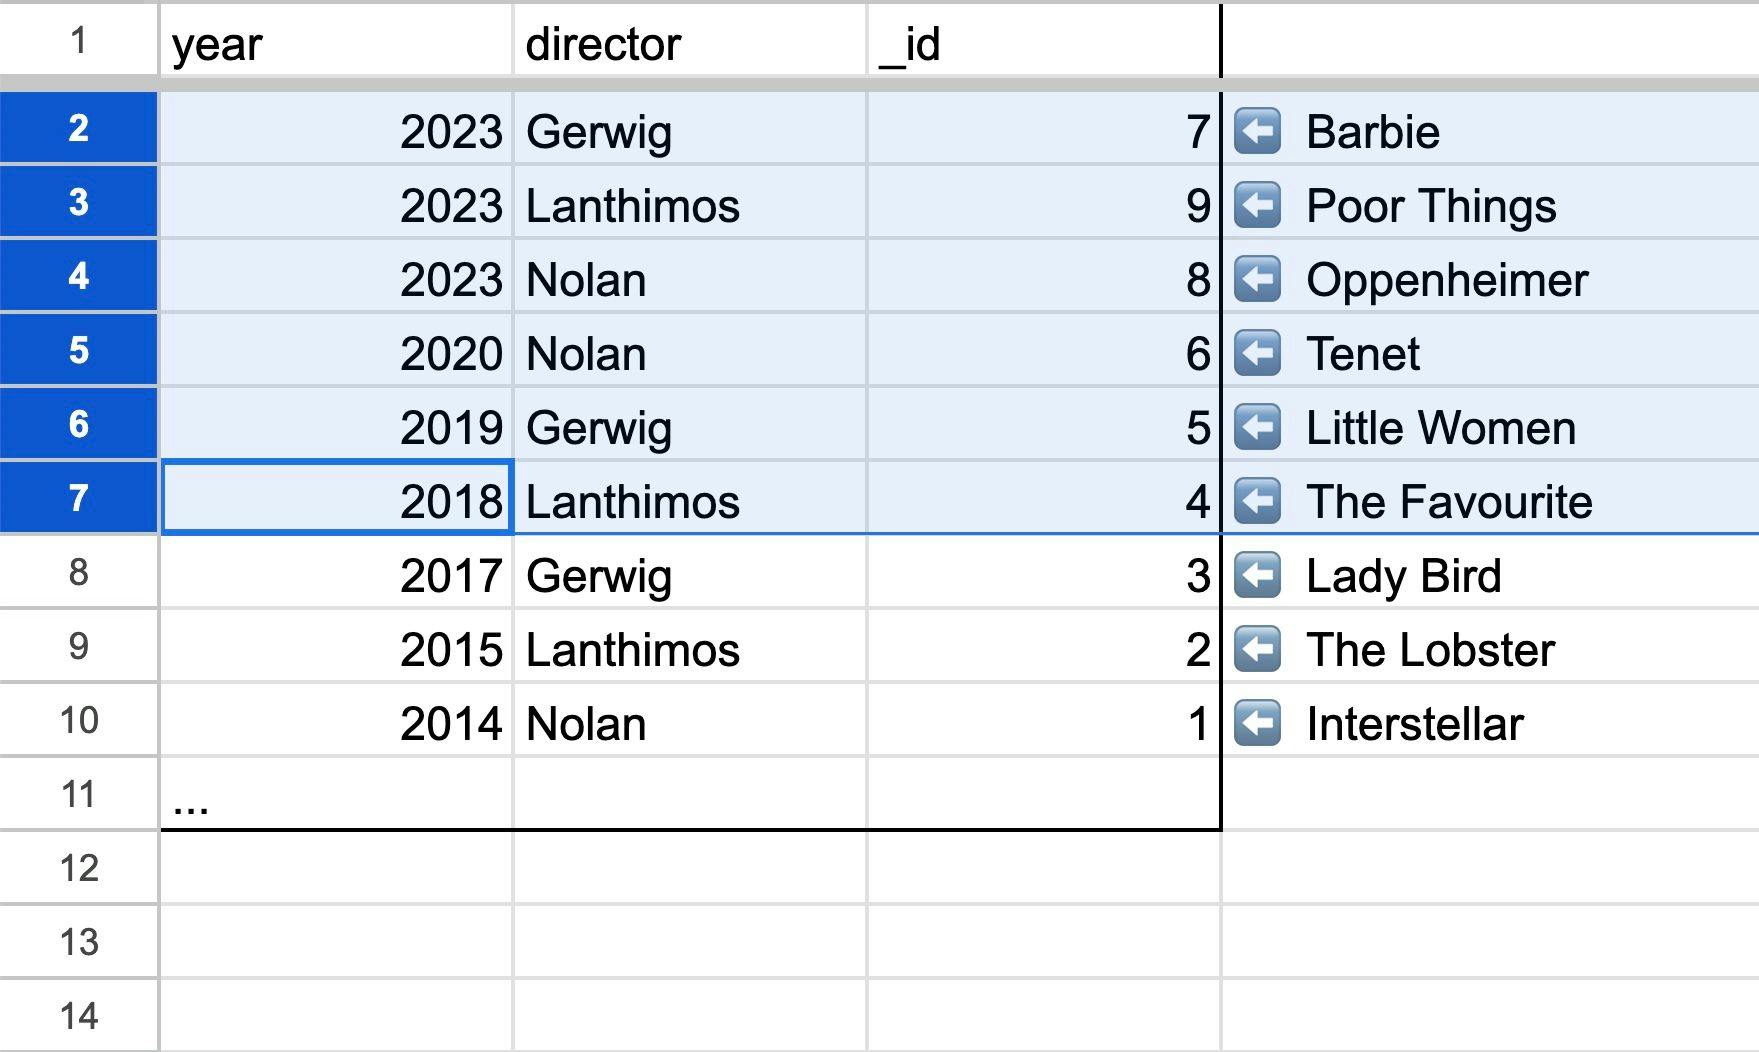 Movies sorted by year and then by director